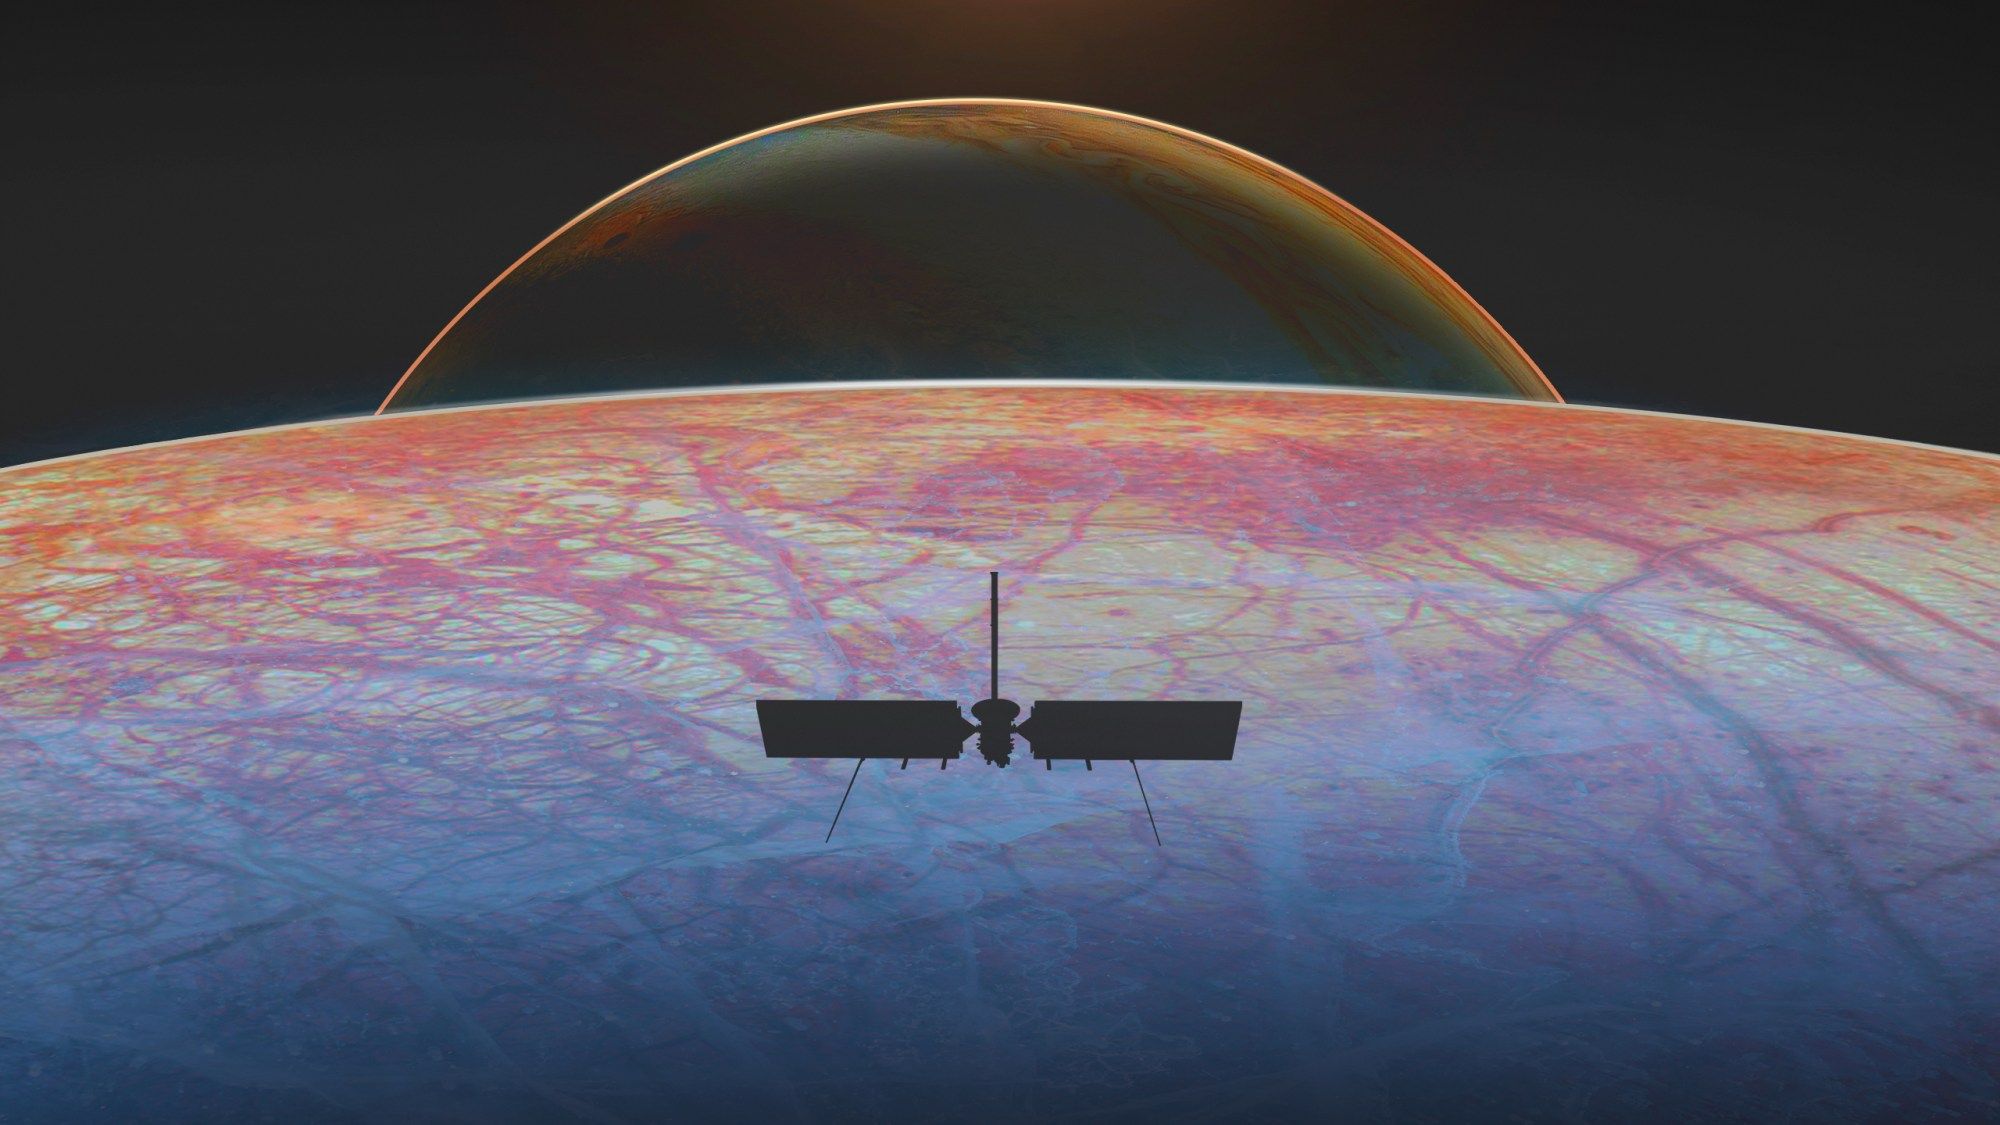 An illustration shows a spacecraft in silhouette above an icy moon's surface with reddish fractures. Beyond the moon's horizon, the planet Jupiter sits in the distance.